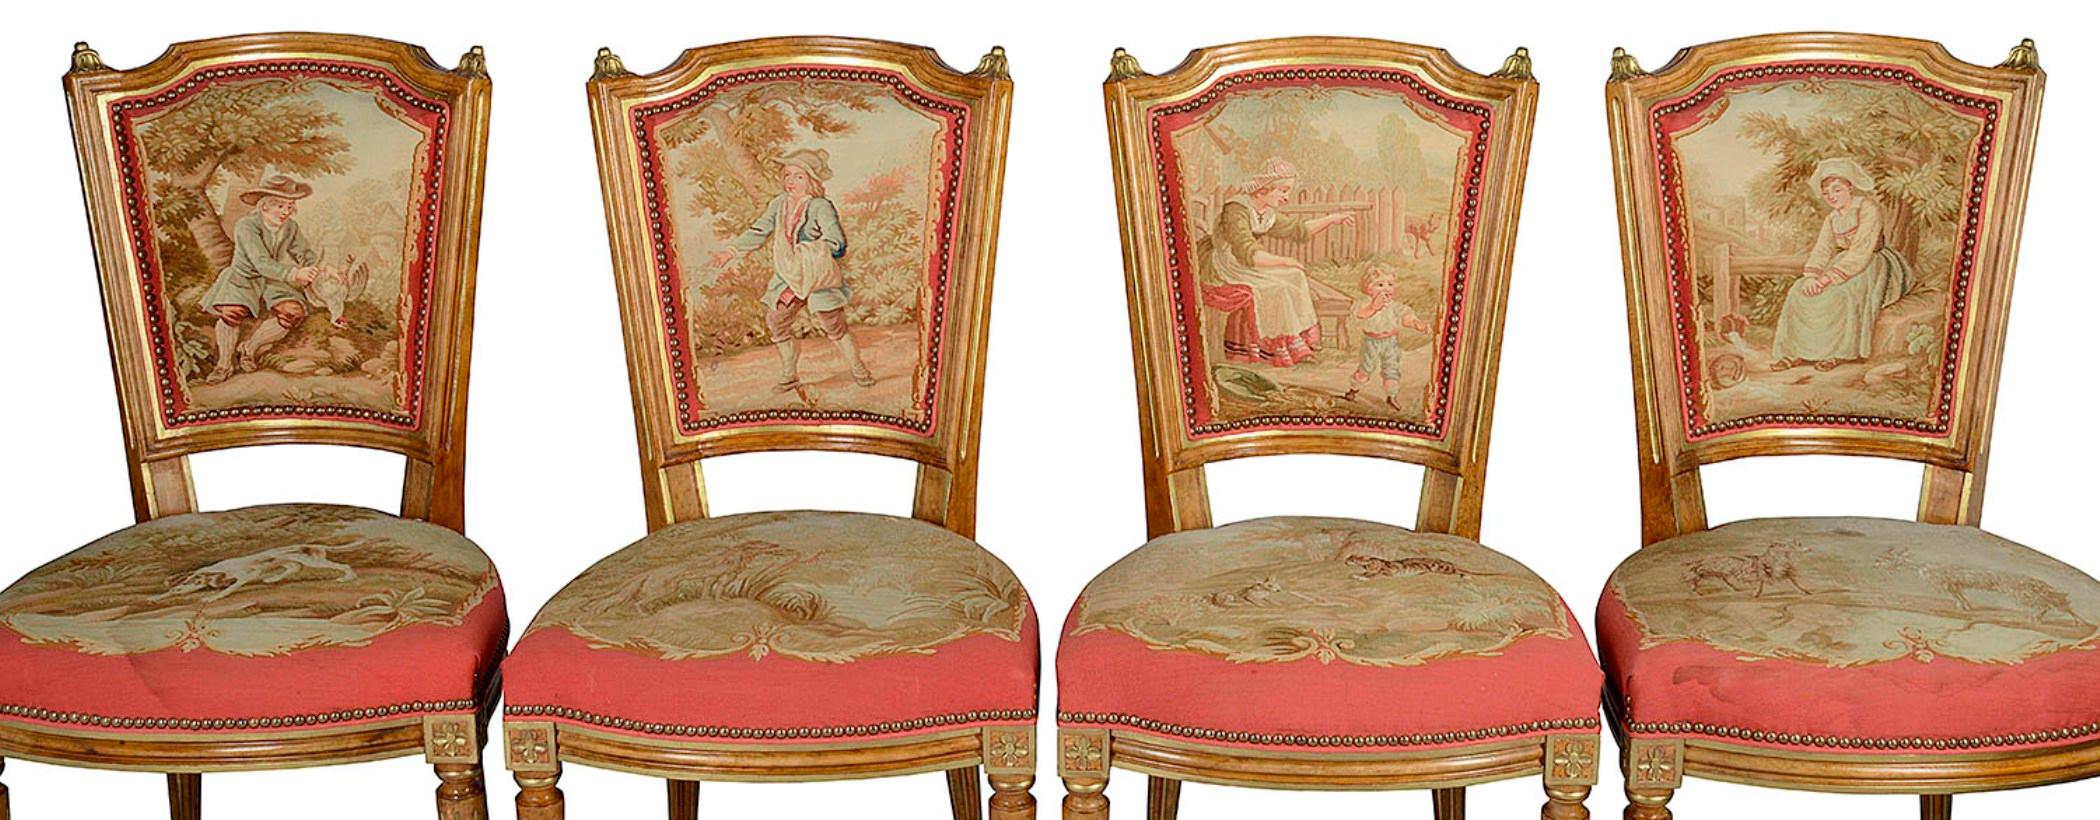 French Salon Suite, 19th Century, Aubusson Tapestry 2